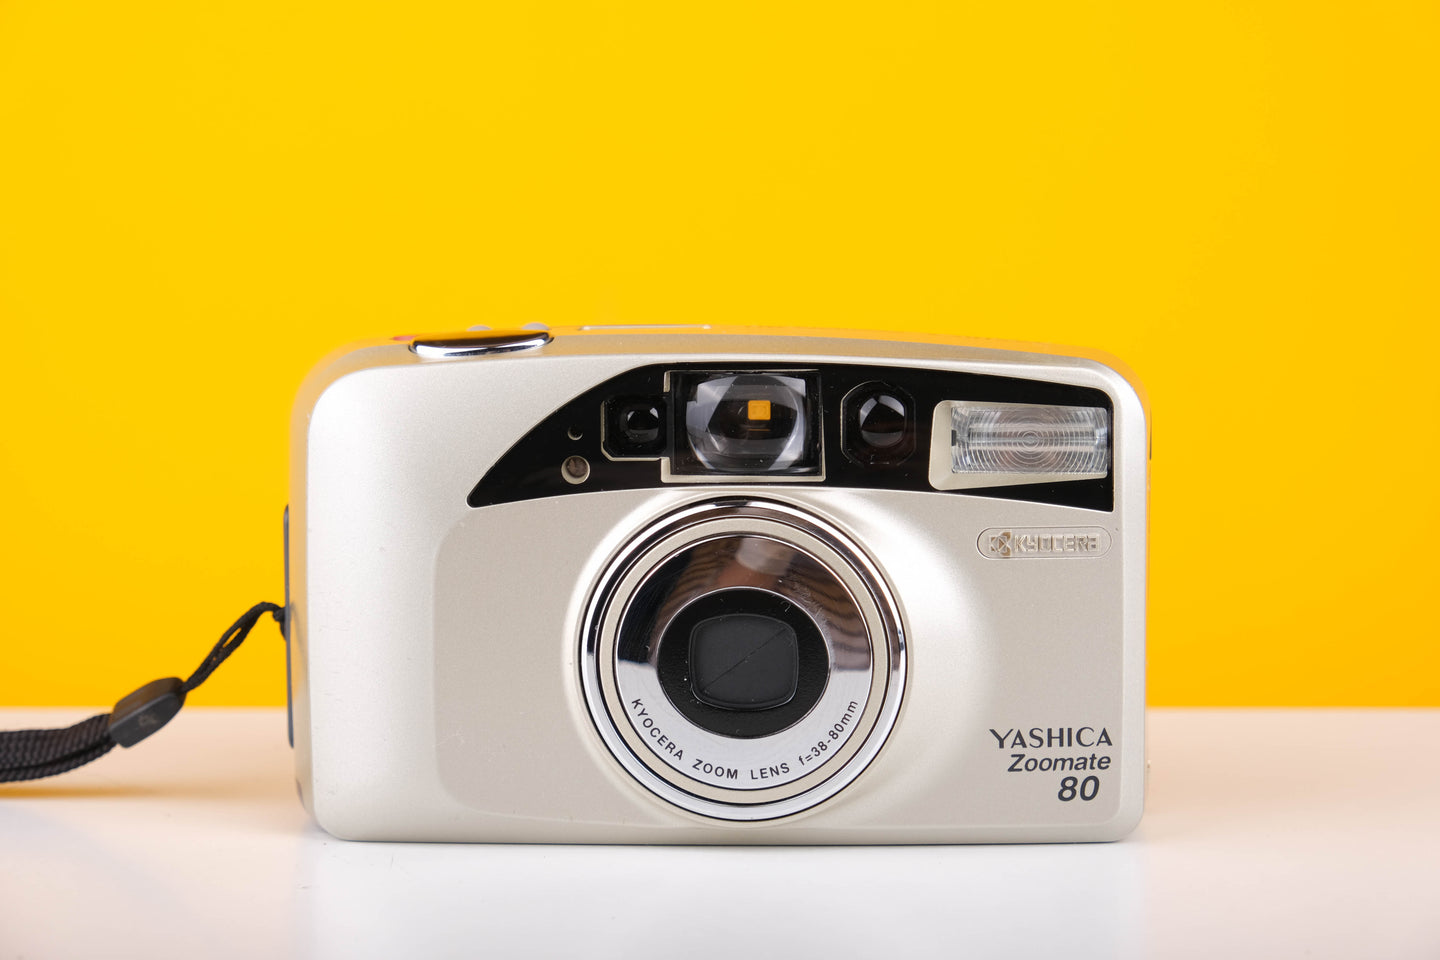 Yashica Zoomate 80 35mm Point and Shoot Film Camera